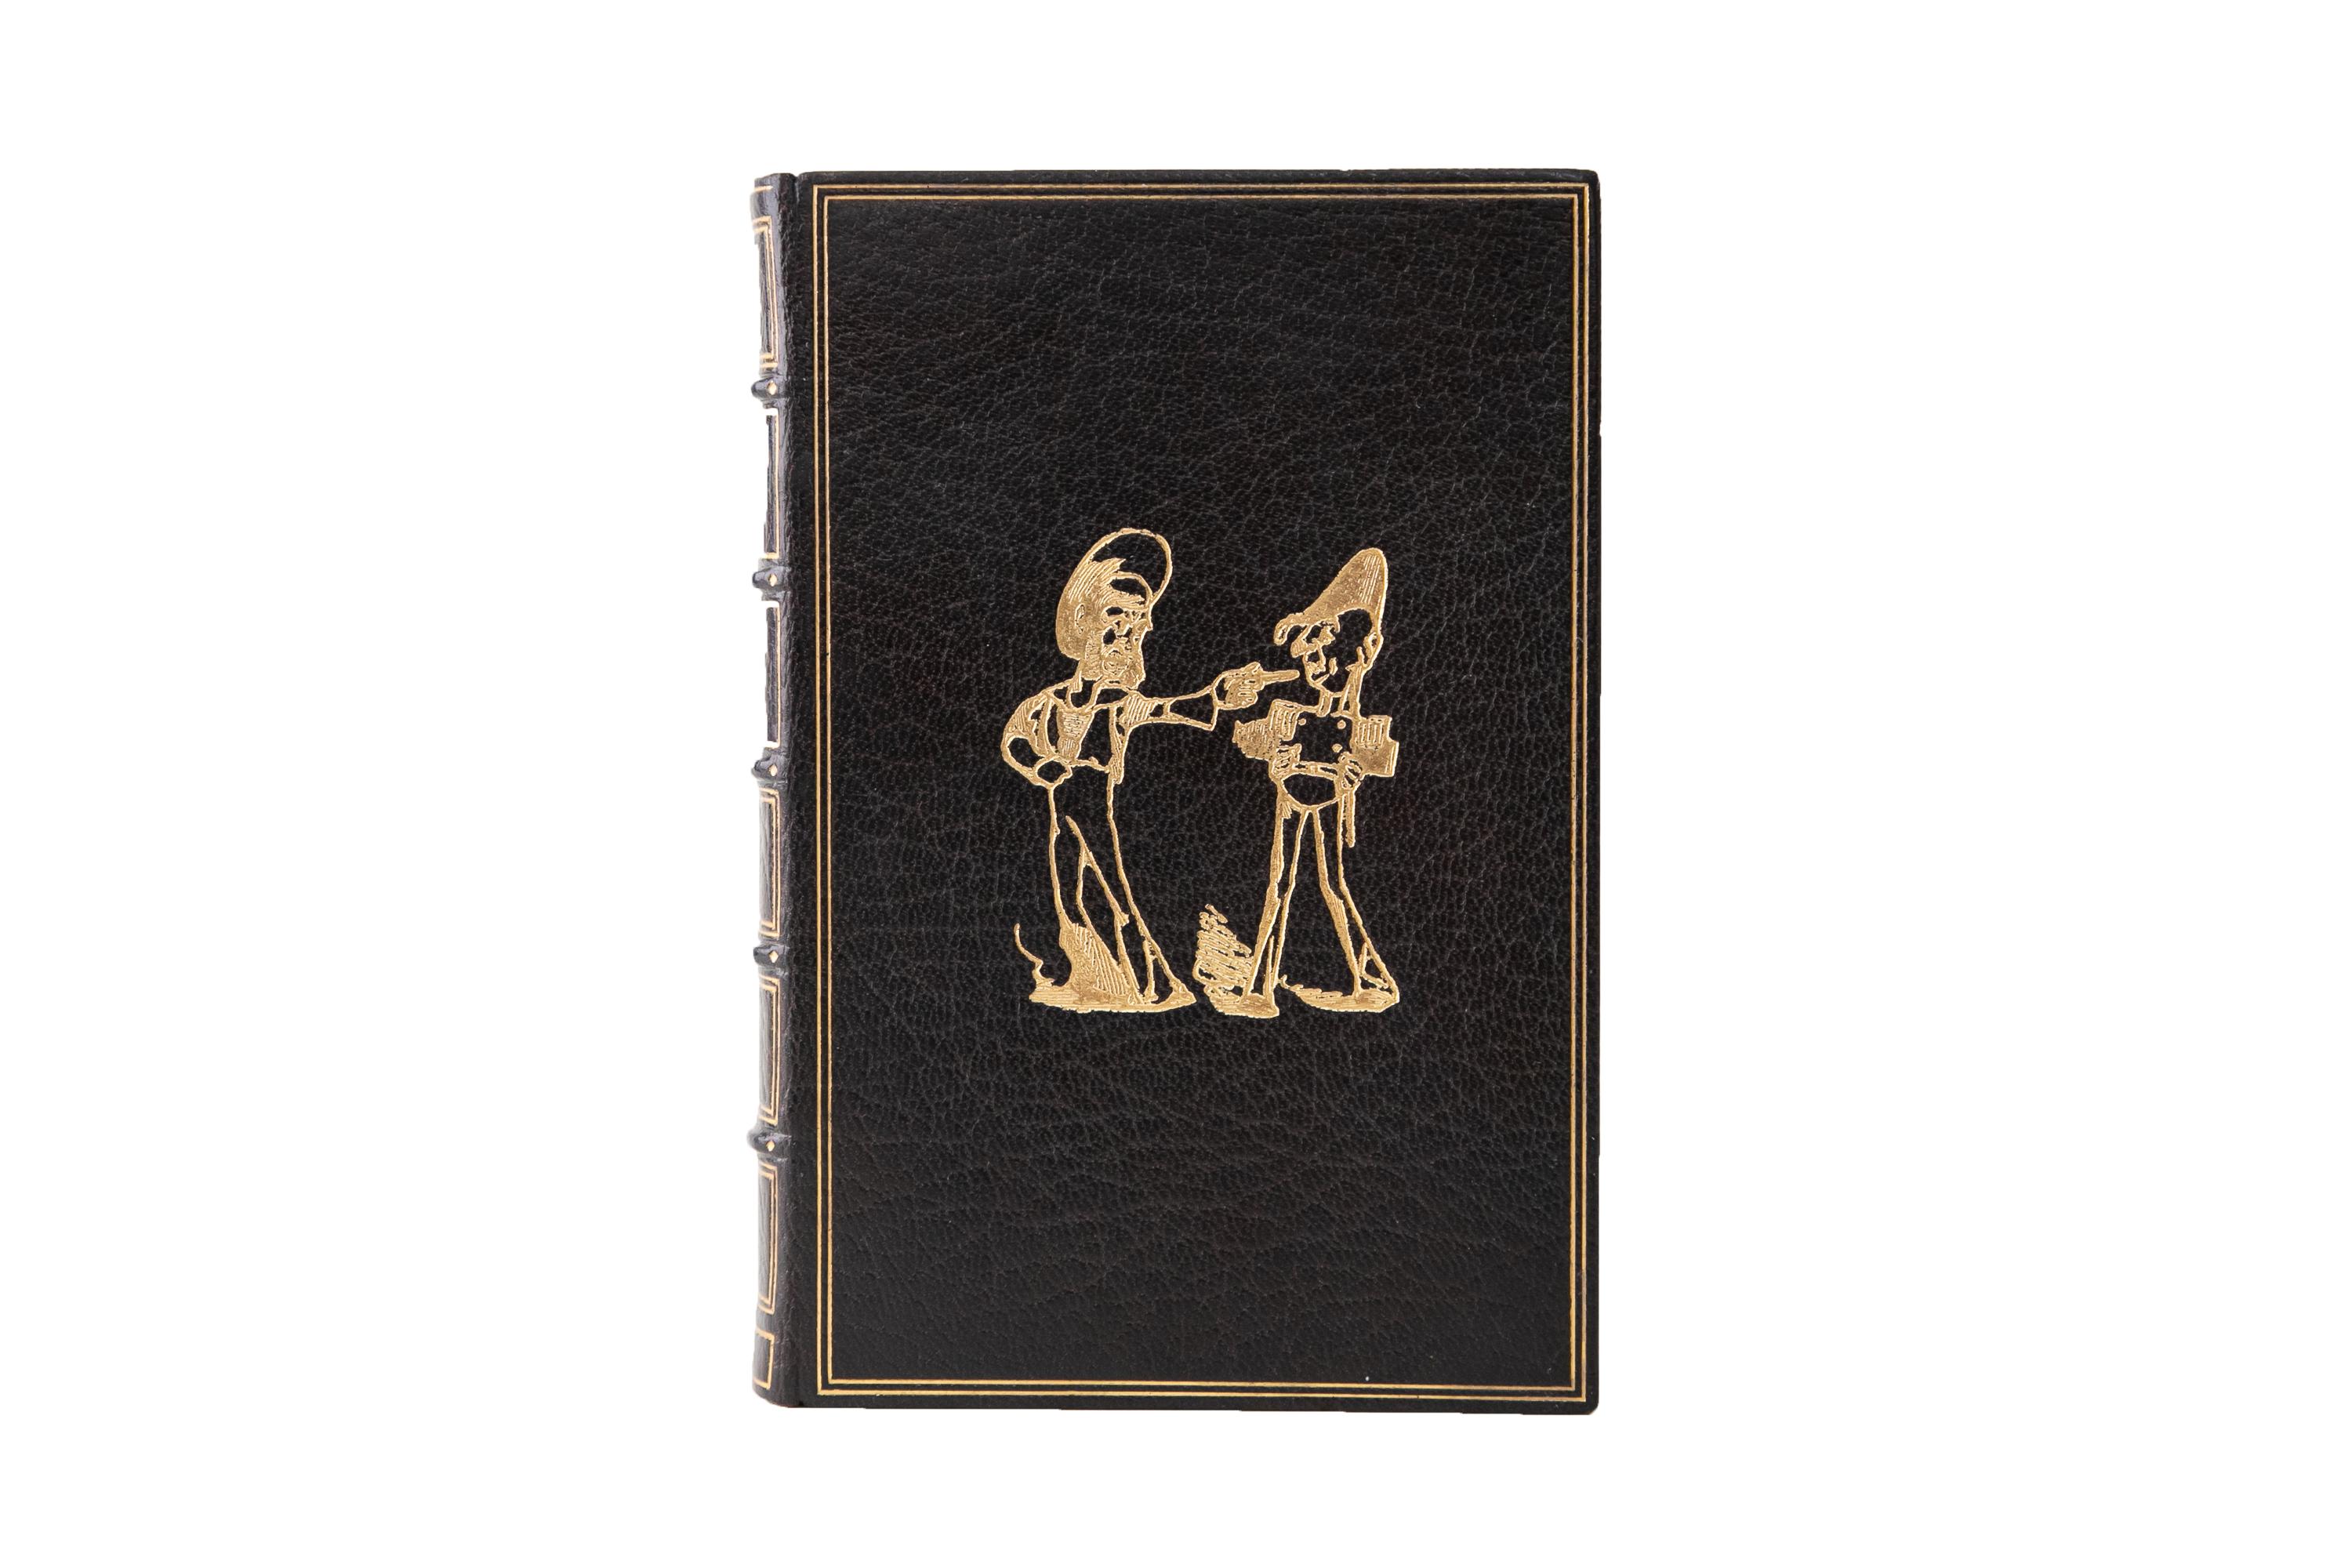 1 Volume. W.S. Gilbert, The Bab Ballads. Bound by Bayntun Riviere in full brown morocco with the cover displaying a double-ruled gilt-tooled border and gilt-tooled depictions of characters. The spines display raised bands, panel bordering, and label